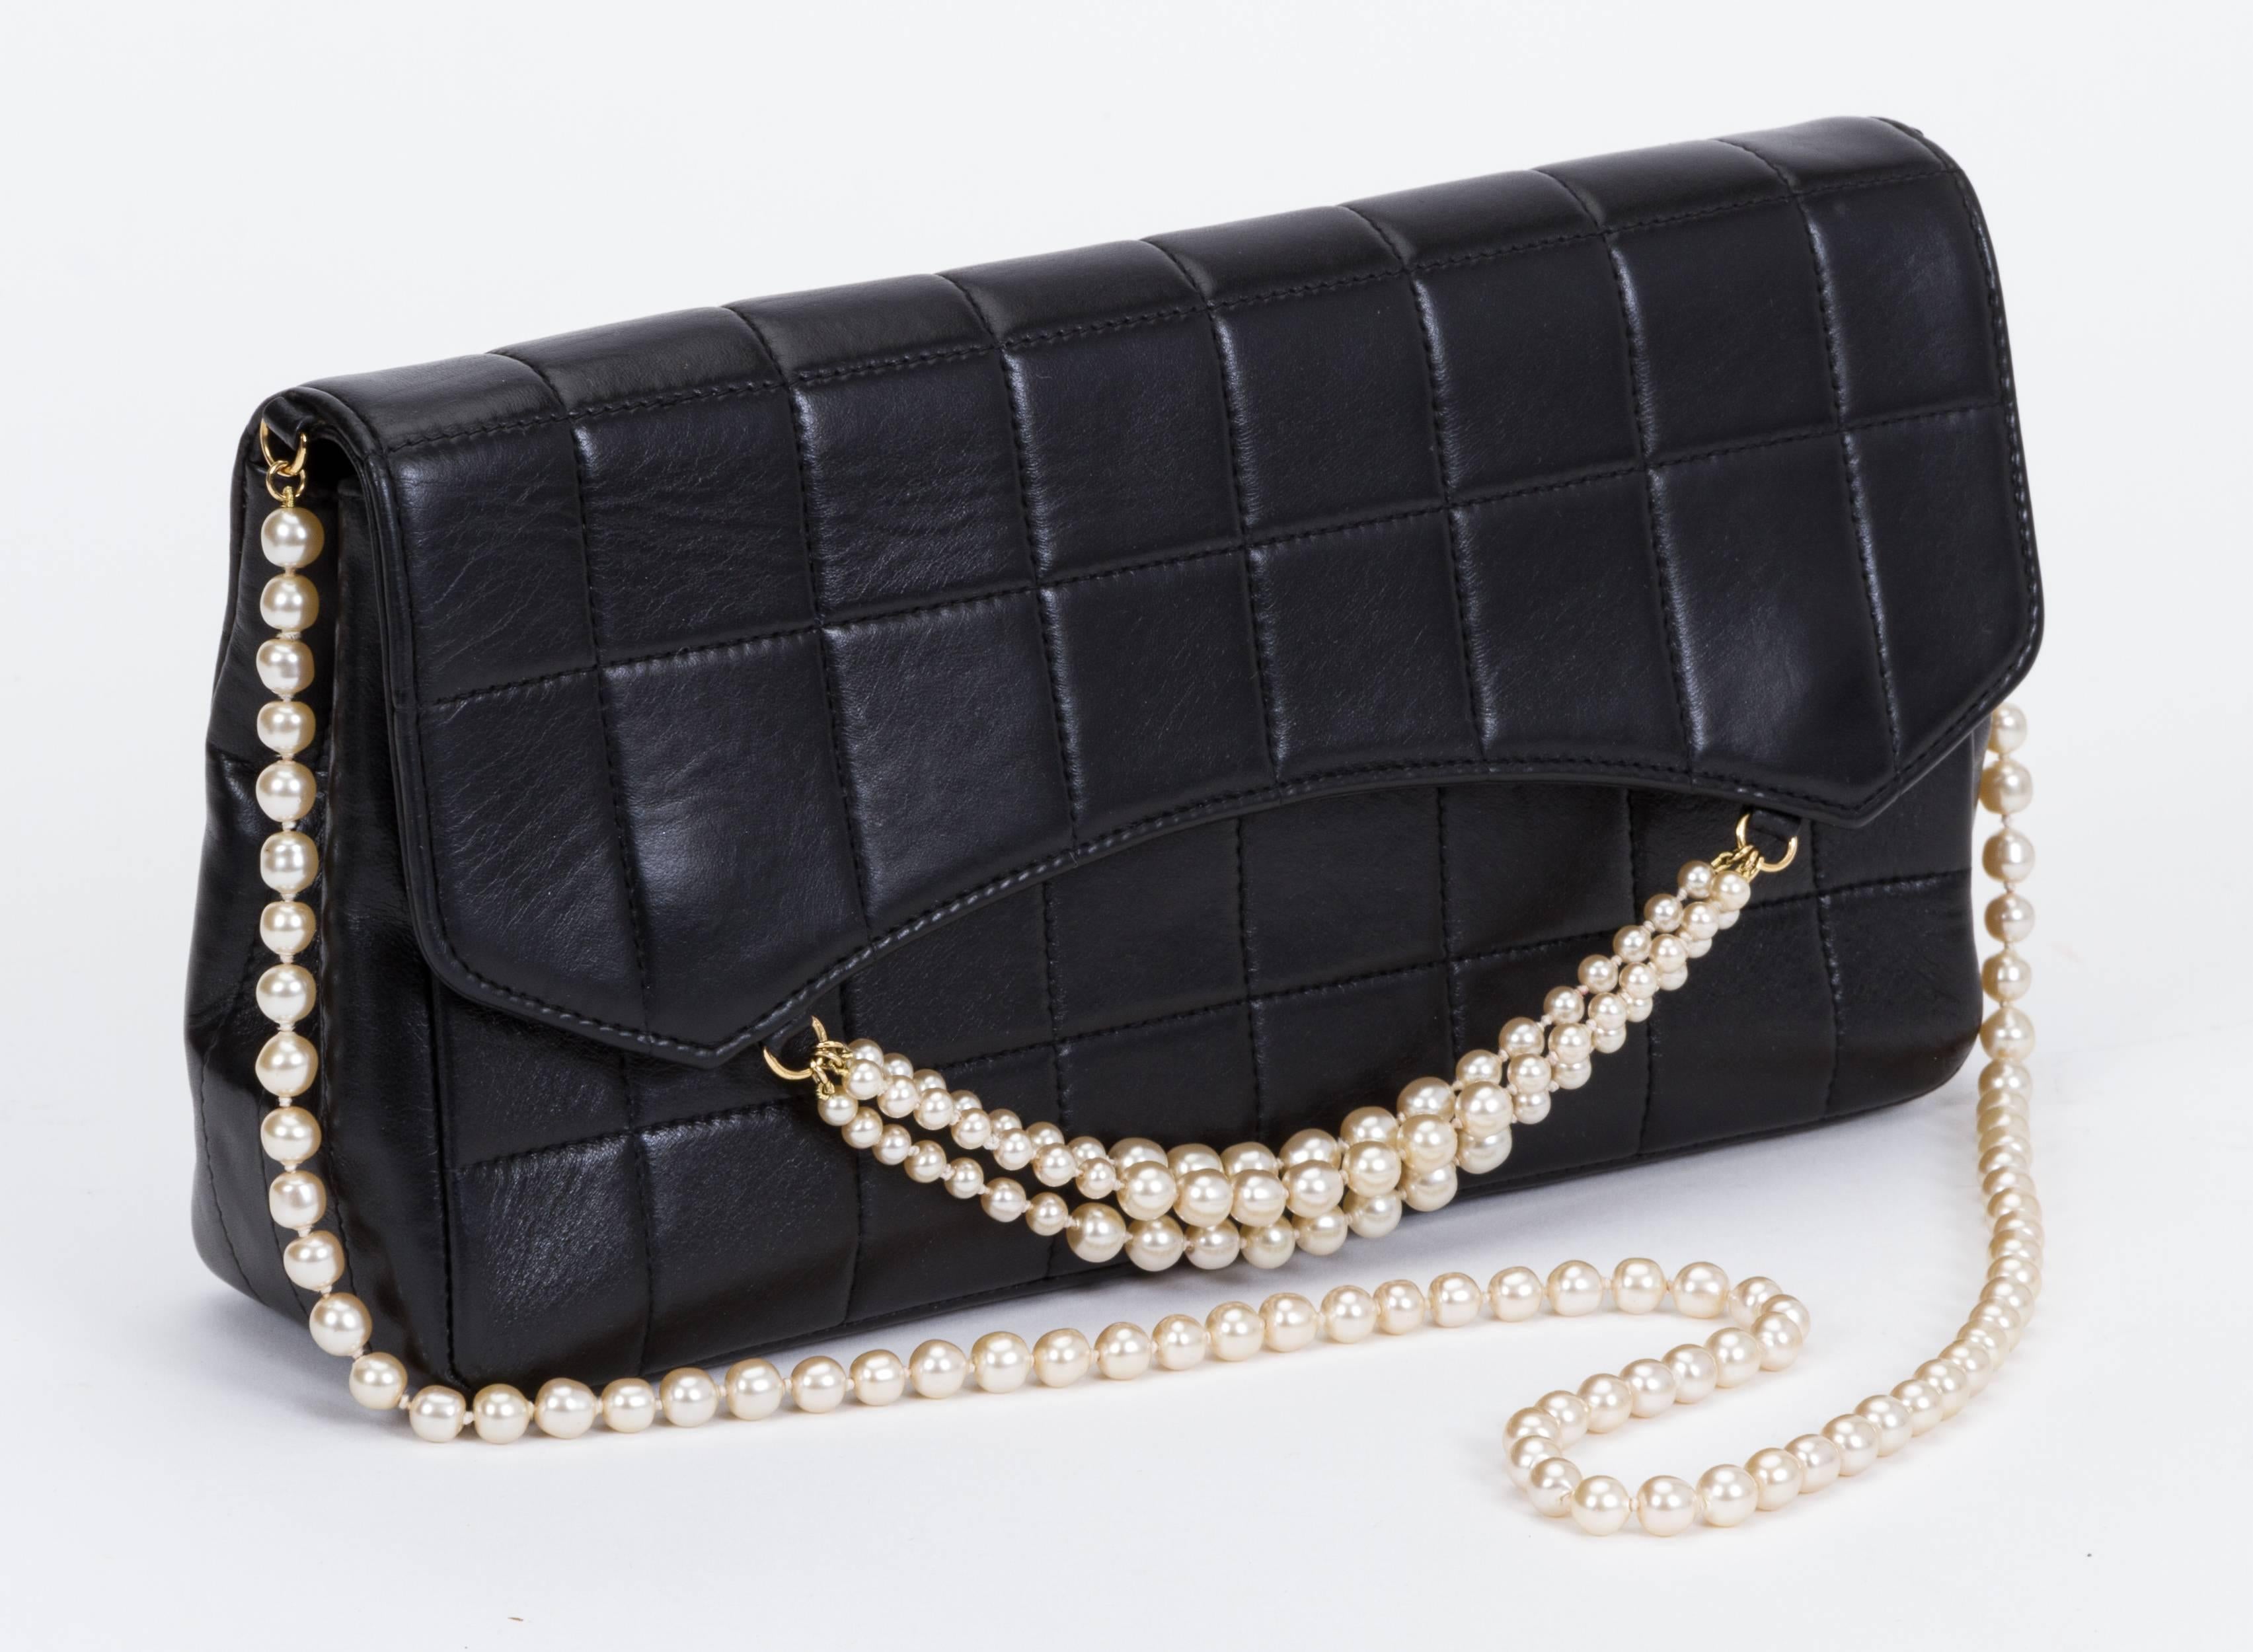 Chanel evening bag in black quilted lambskin with pearl details. Pearl chain shoulder drop 15